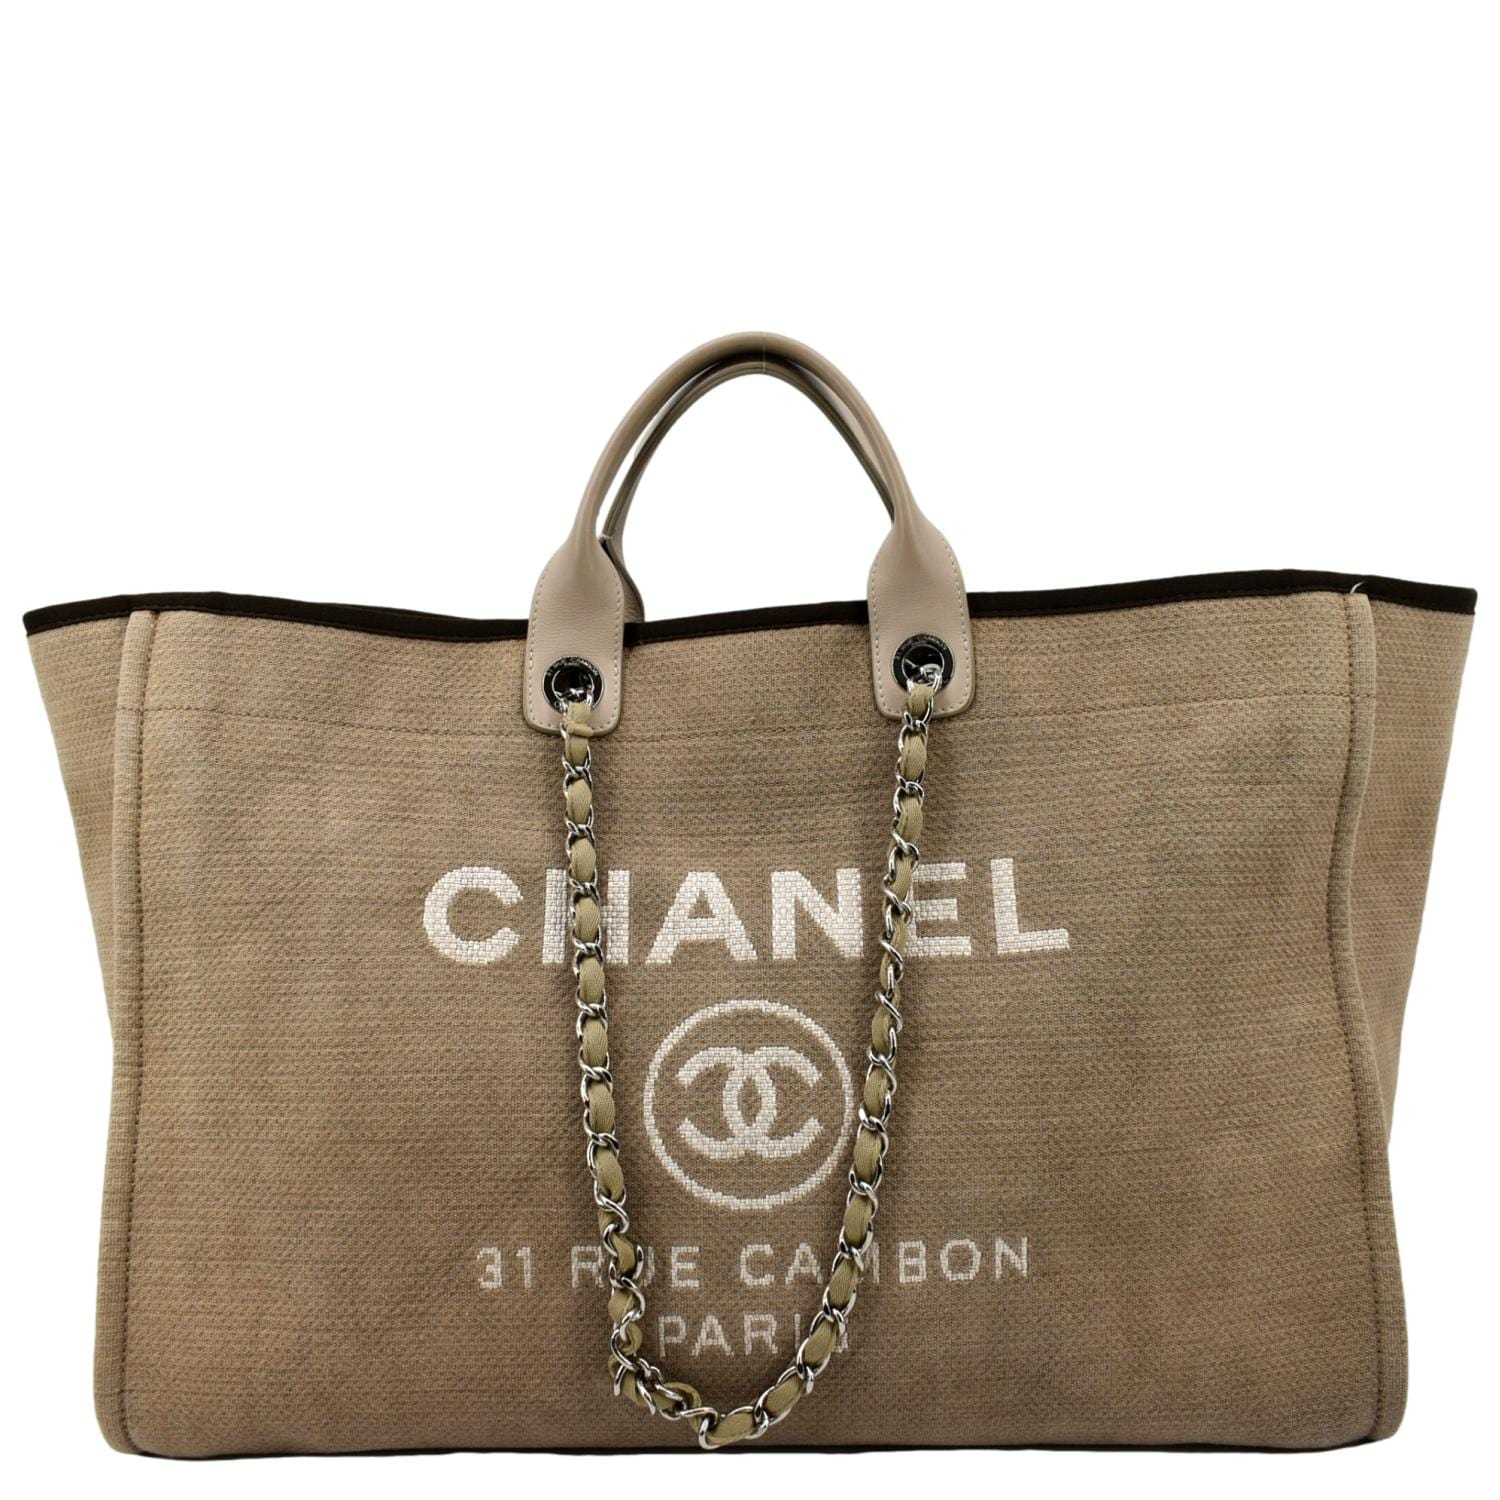 Chanel Brown Canvas Large Deauville Tote